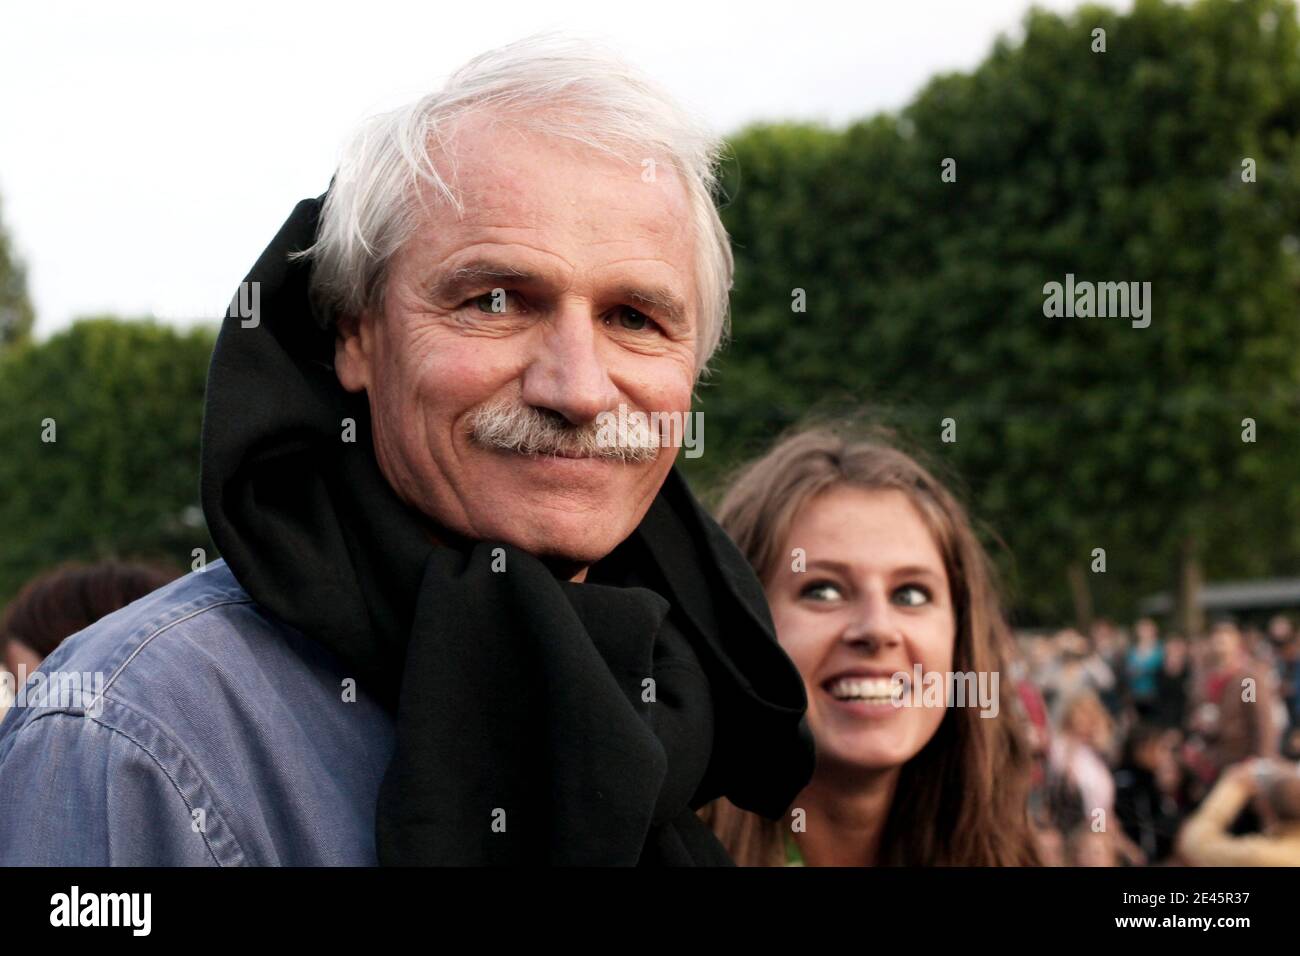 French Photographer And Director Yann Arthus Bertrand Is Seen Prior To The Presentation Of The Movie Home On A Giant Screen Displayed On Champ De Mars Garden Underneath The Eiffel Tower In Paris